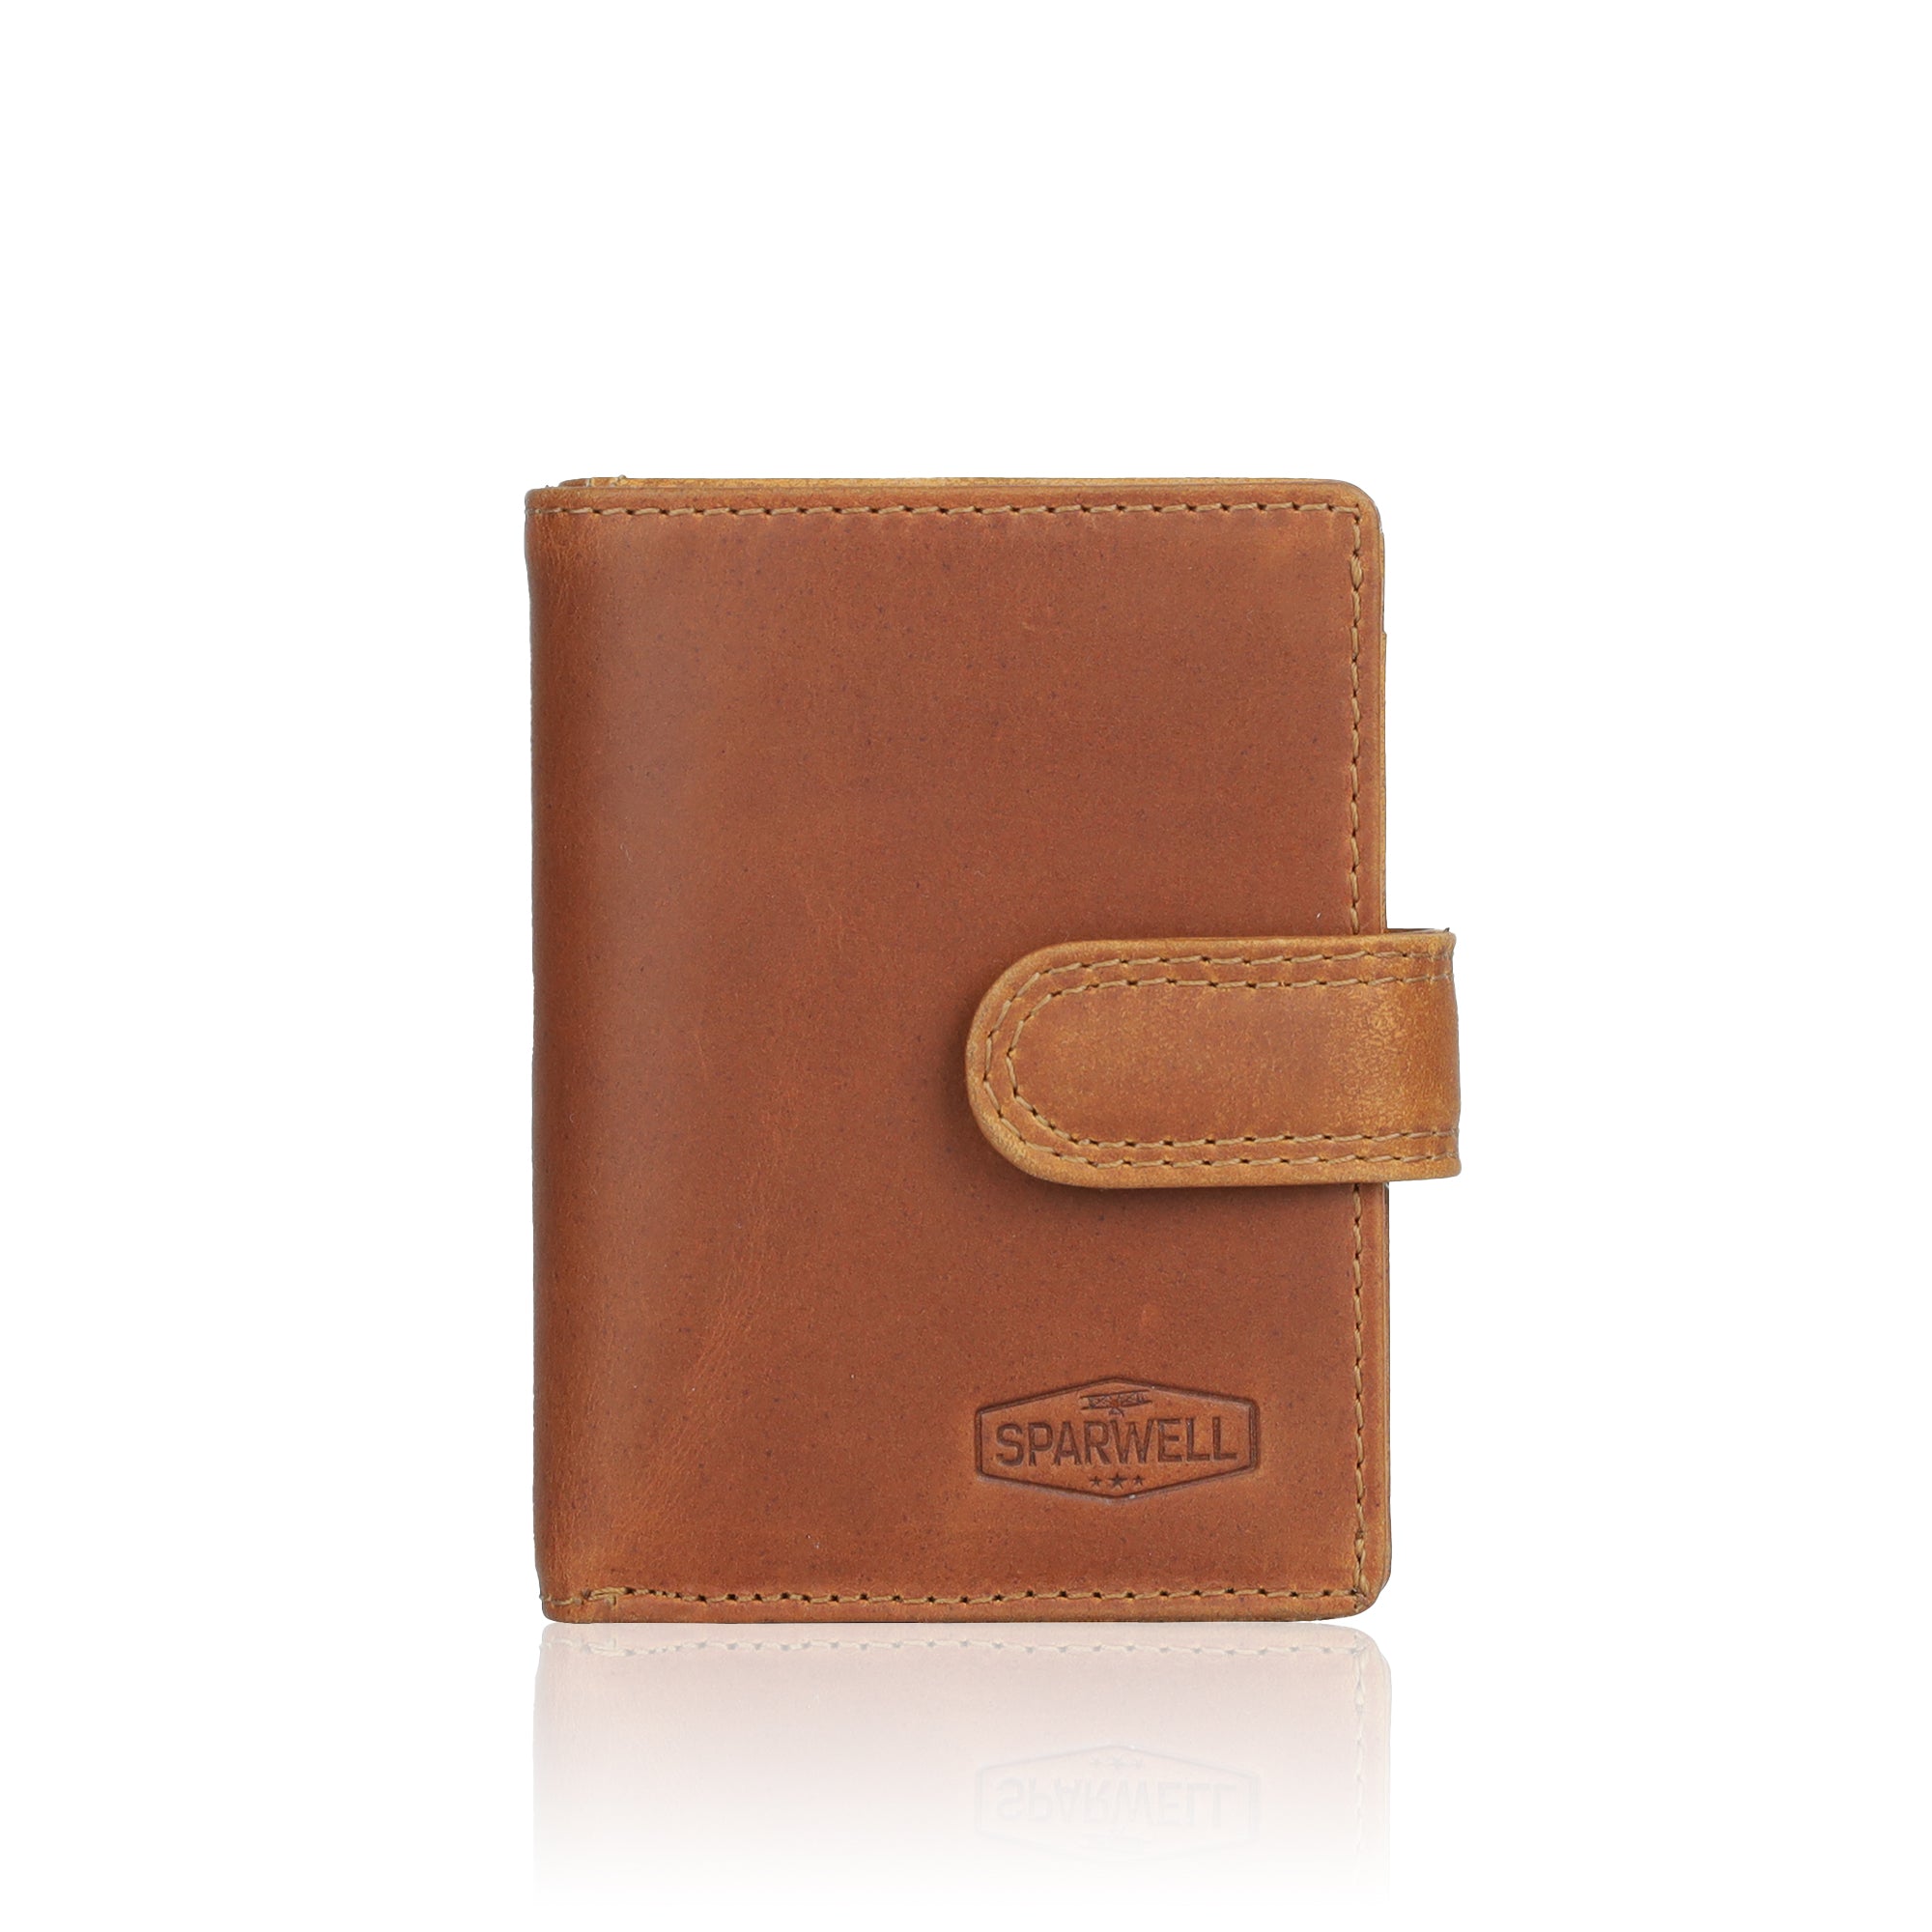 Life Changer leather card holder with hard case